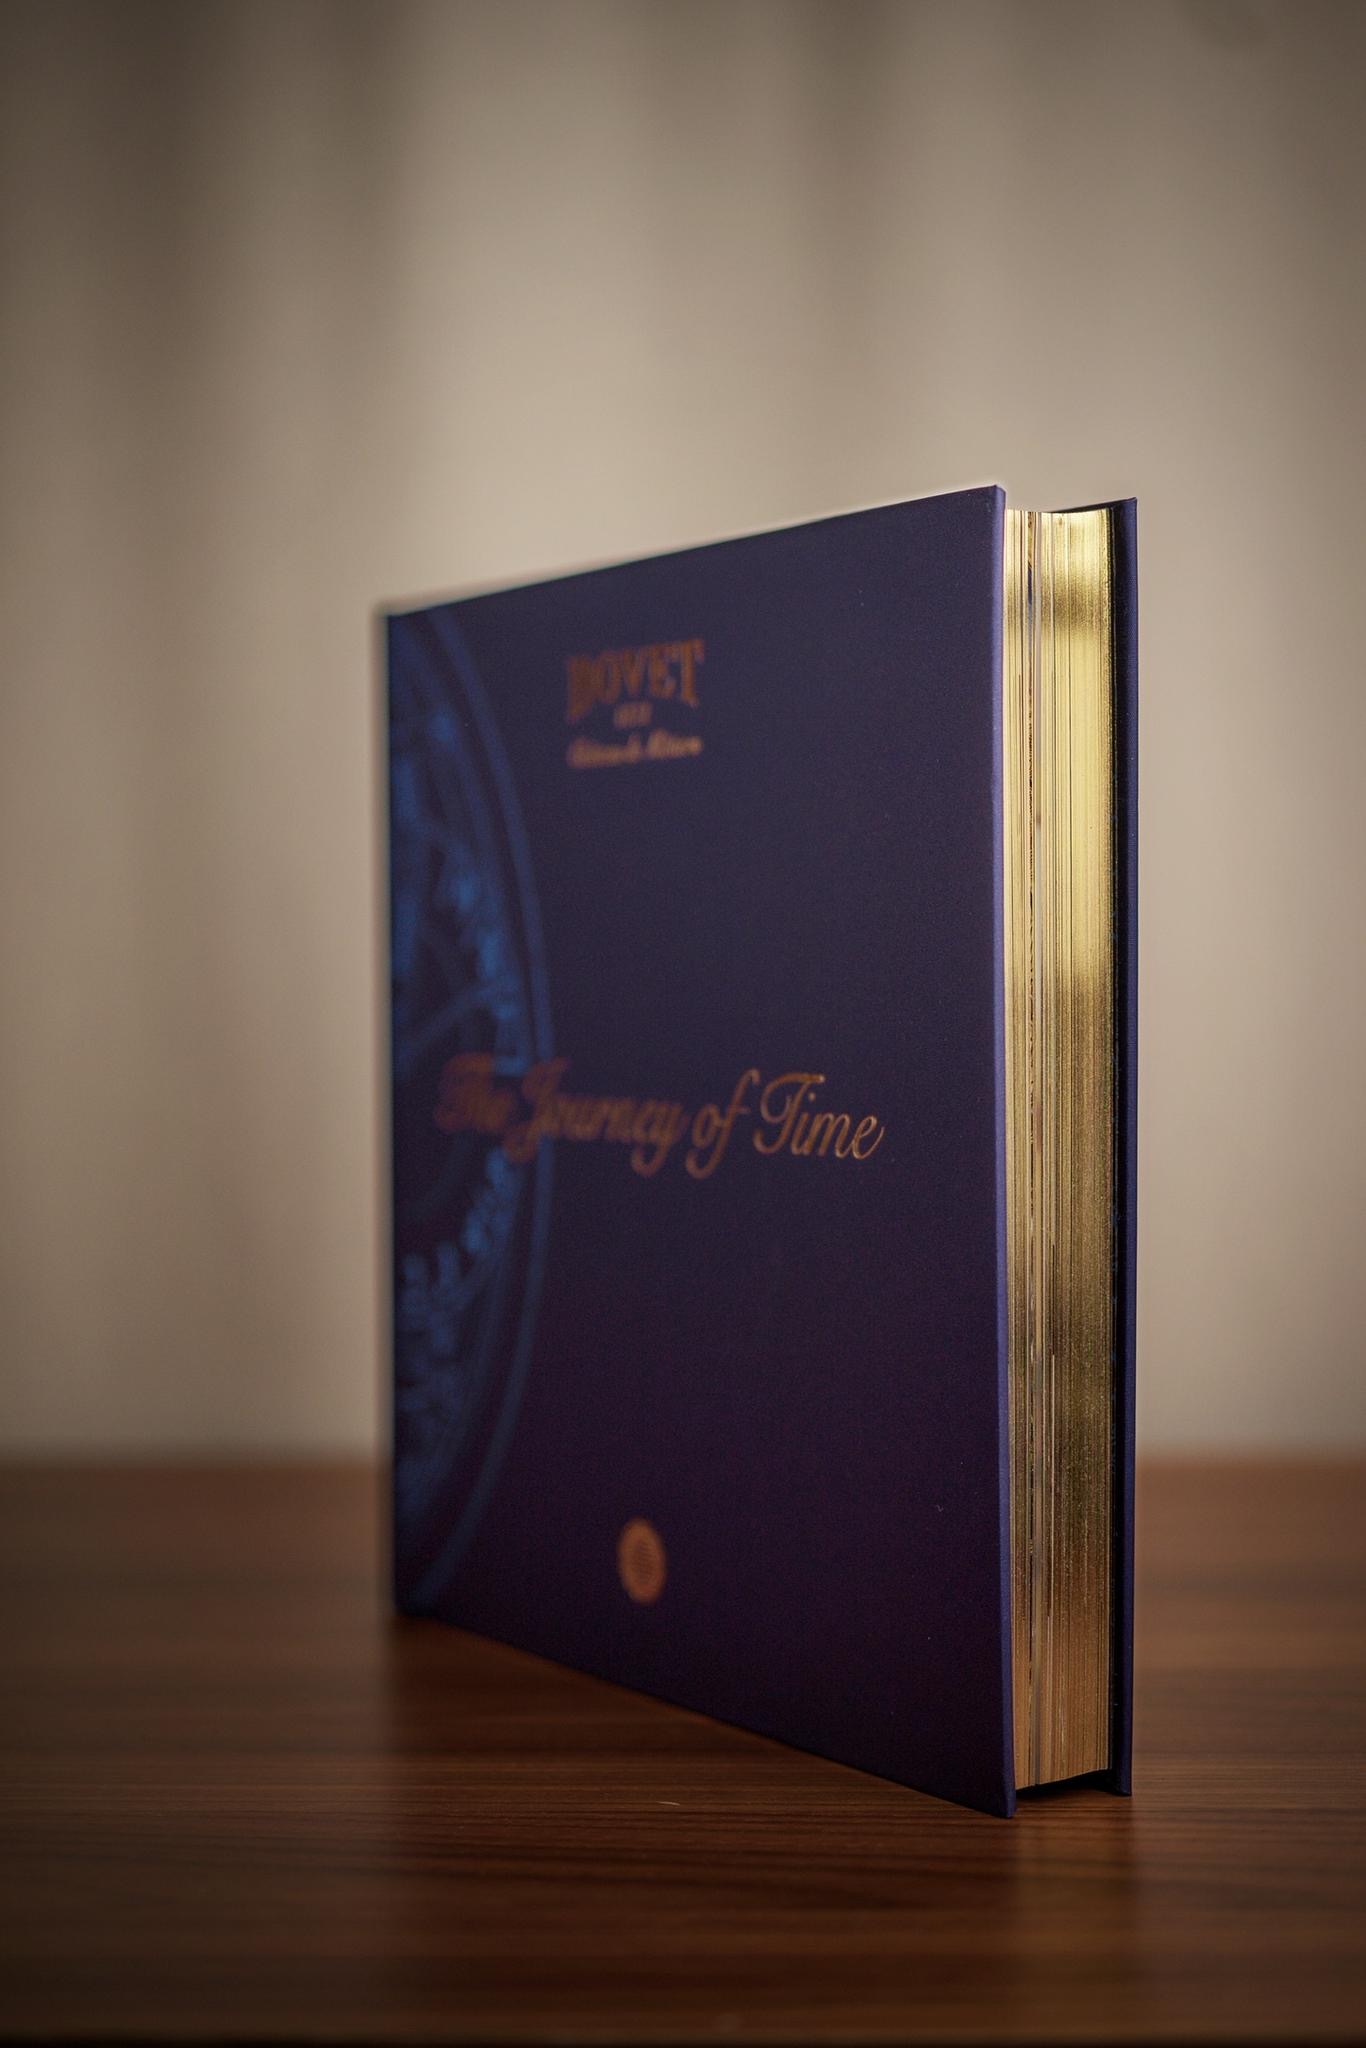 Bovet The Journey of Time 200th Anniversary Book 2 LR